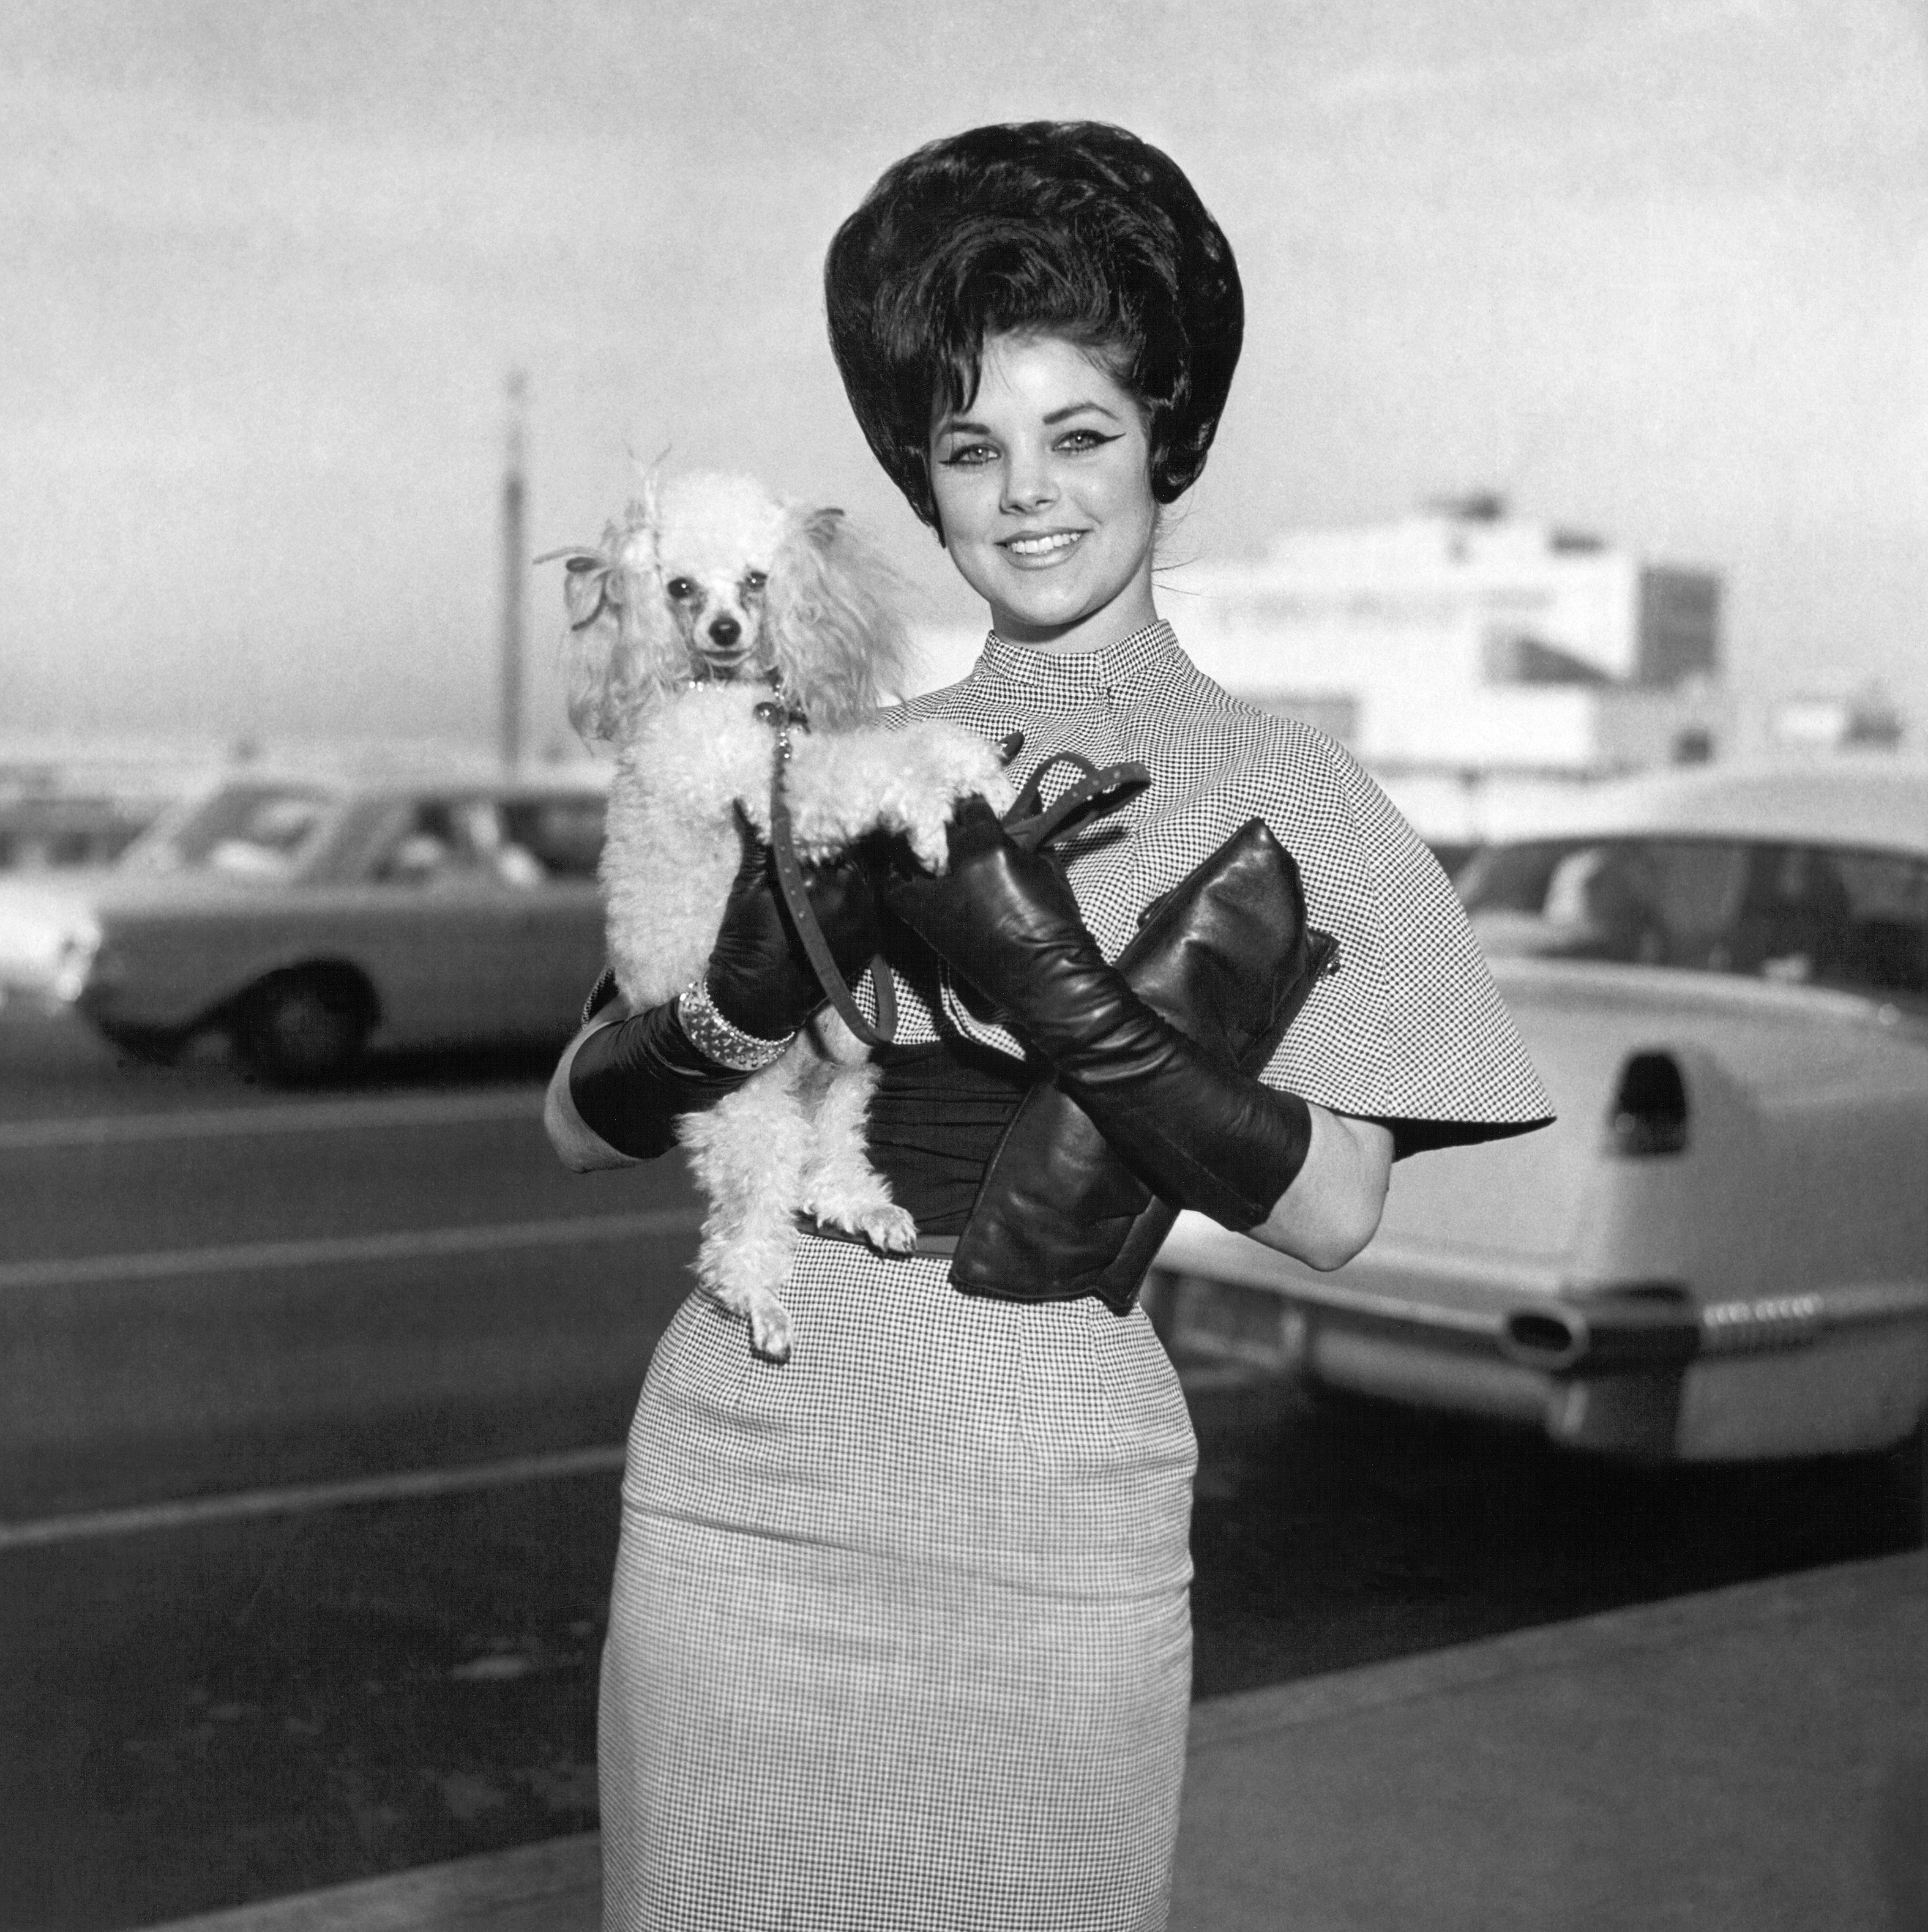 Priscilla Presley at Memphis International airport in Memphis, Tennessee on January 11, 1963 | Source: Getty Images